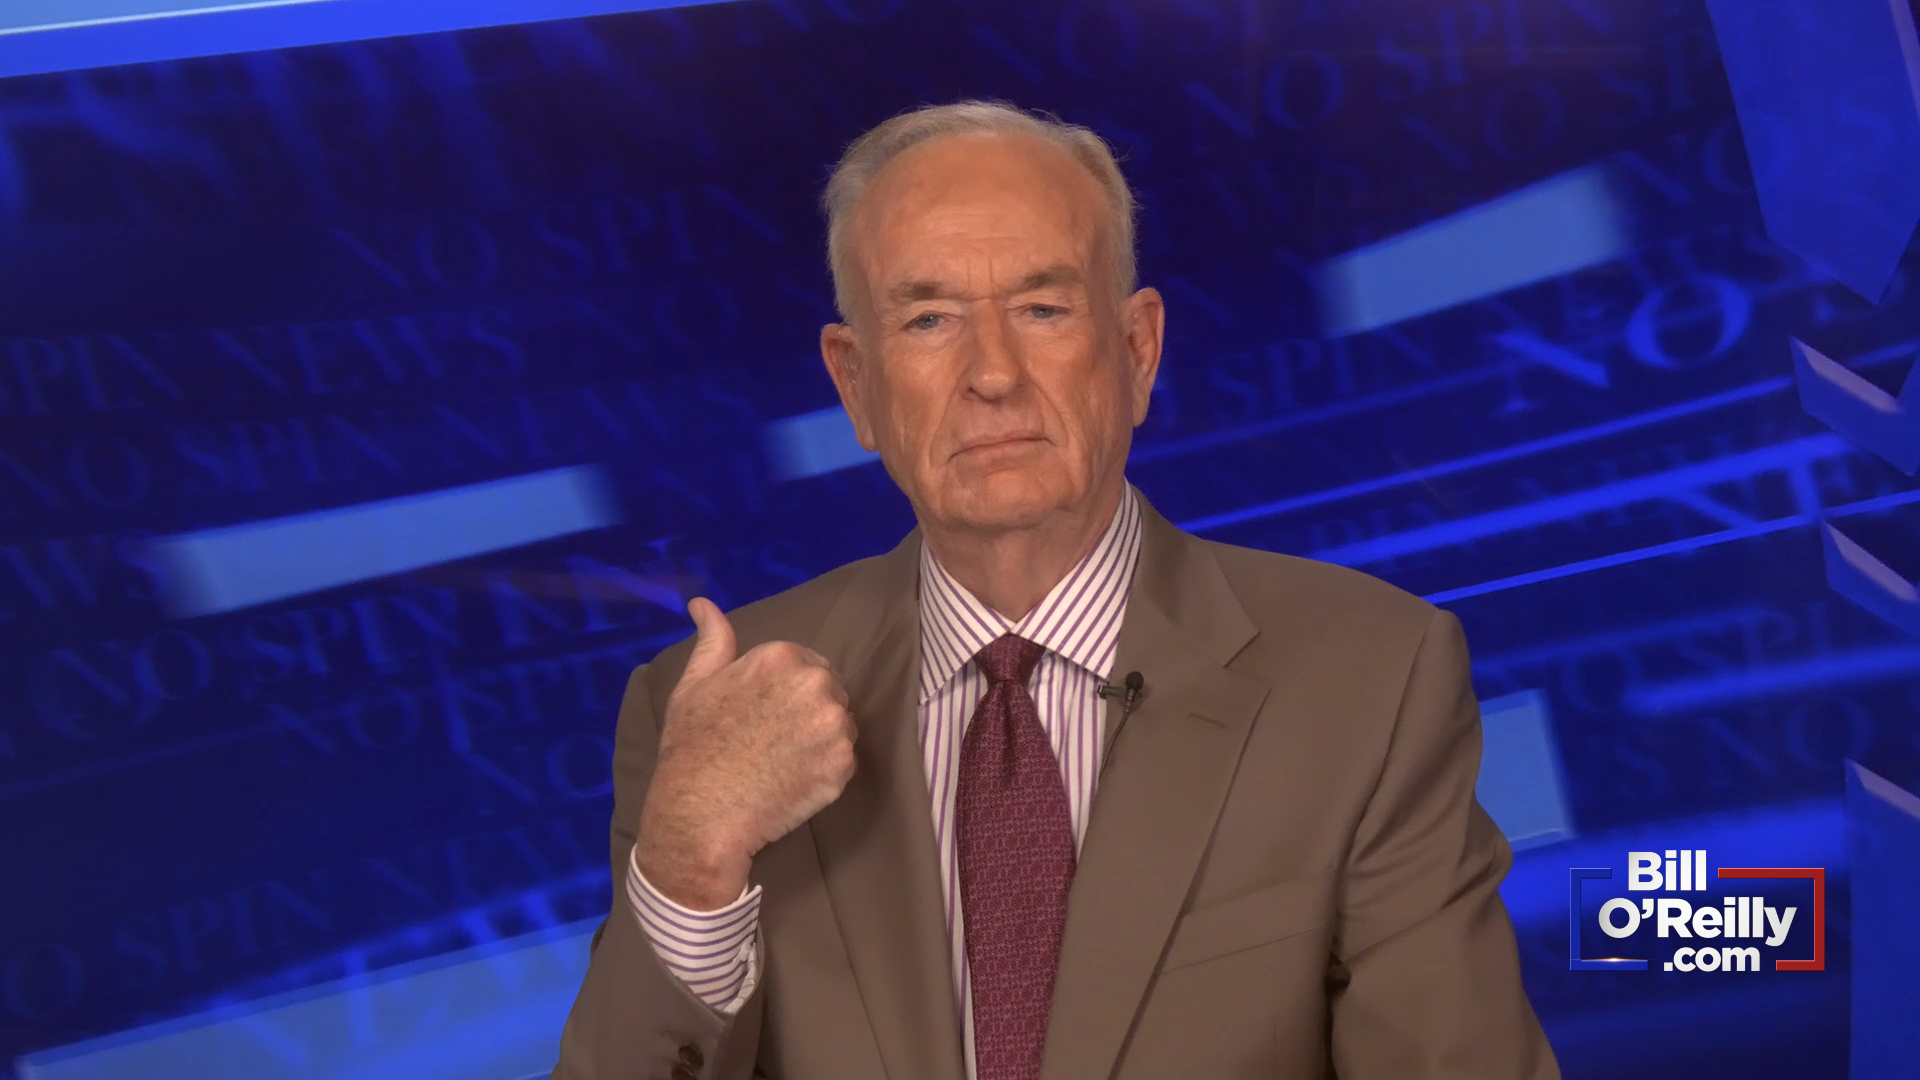 O'Reilly: Kevin McCarthy Criticism Coming From the 'Land of Oz'